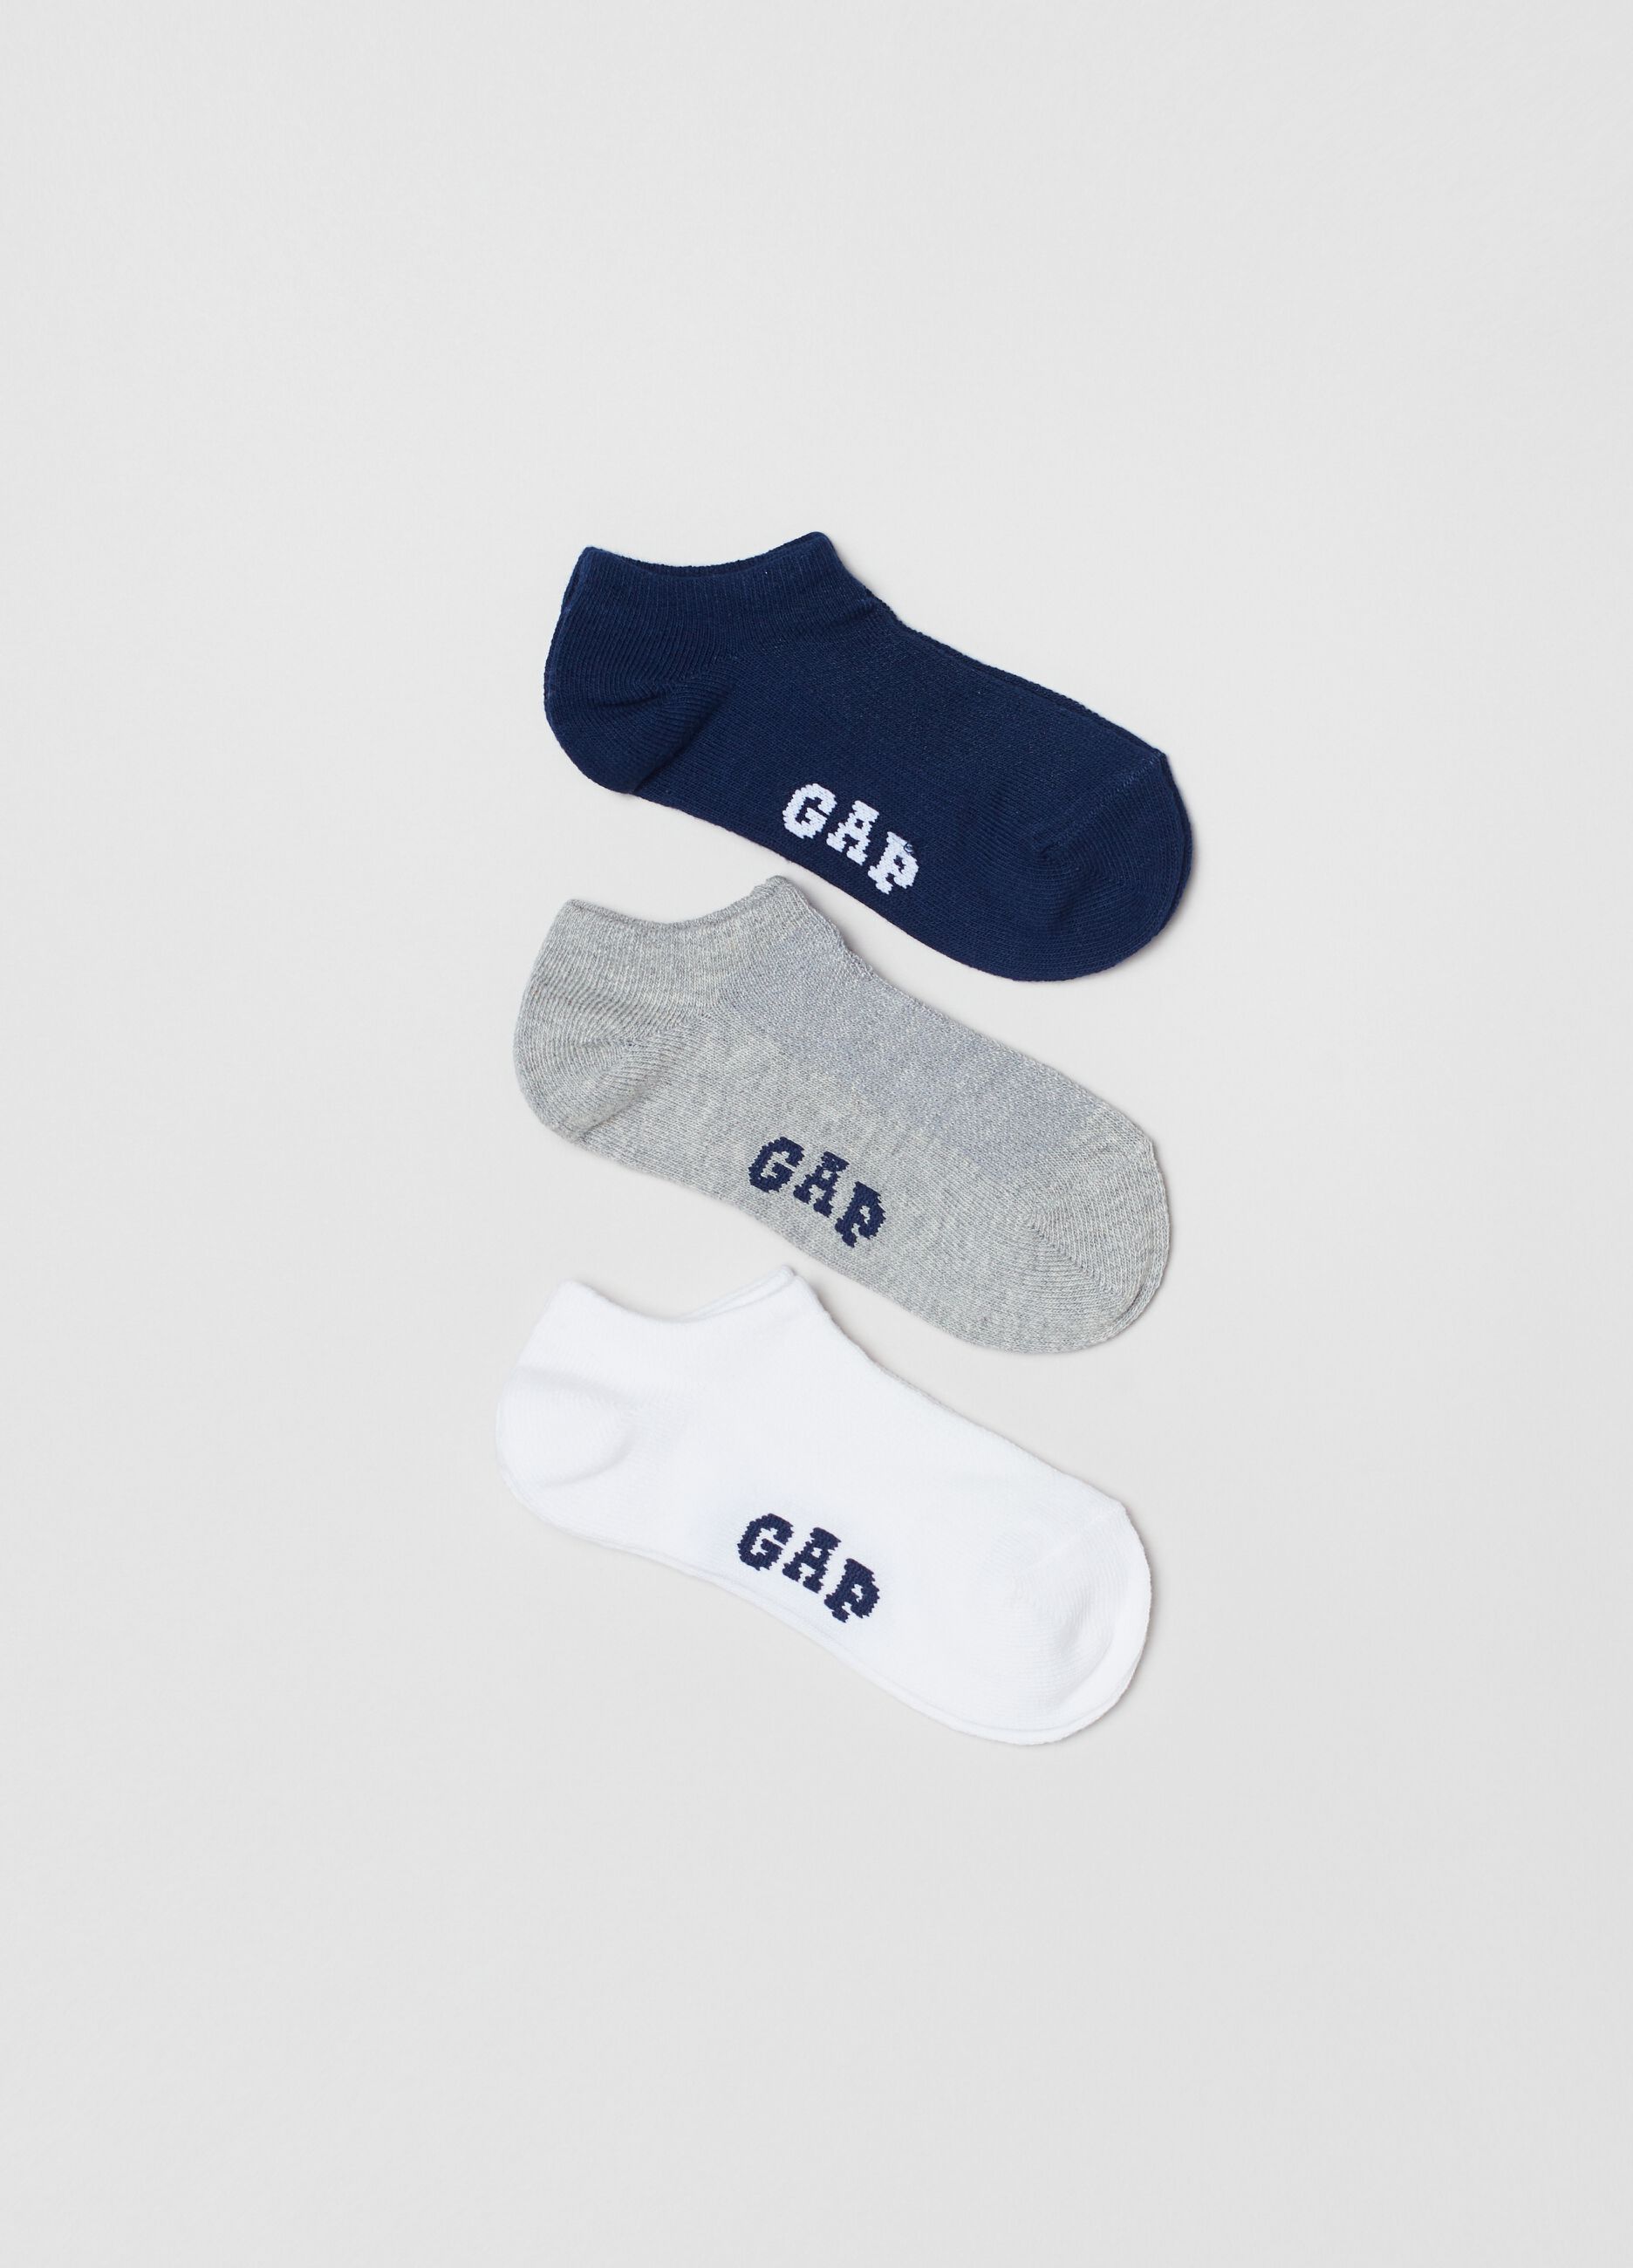 Three-pair pack shoe liners with logo